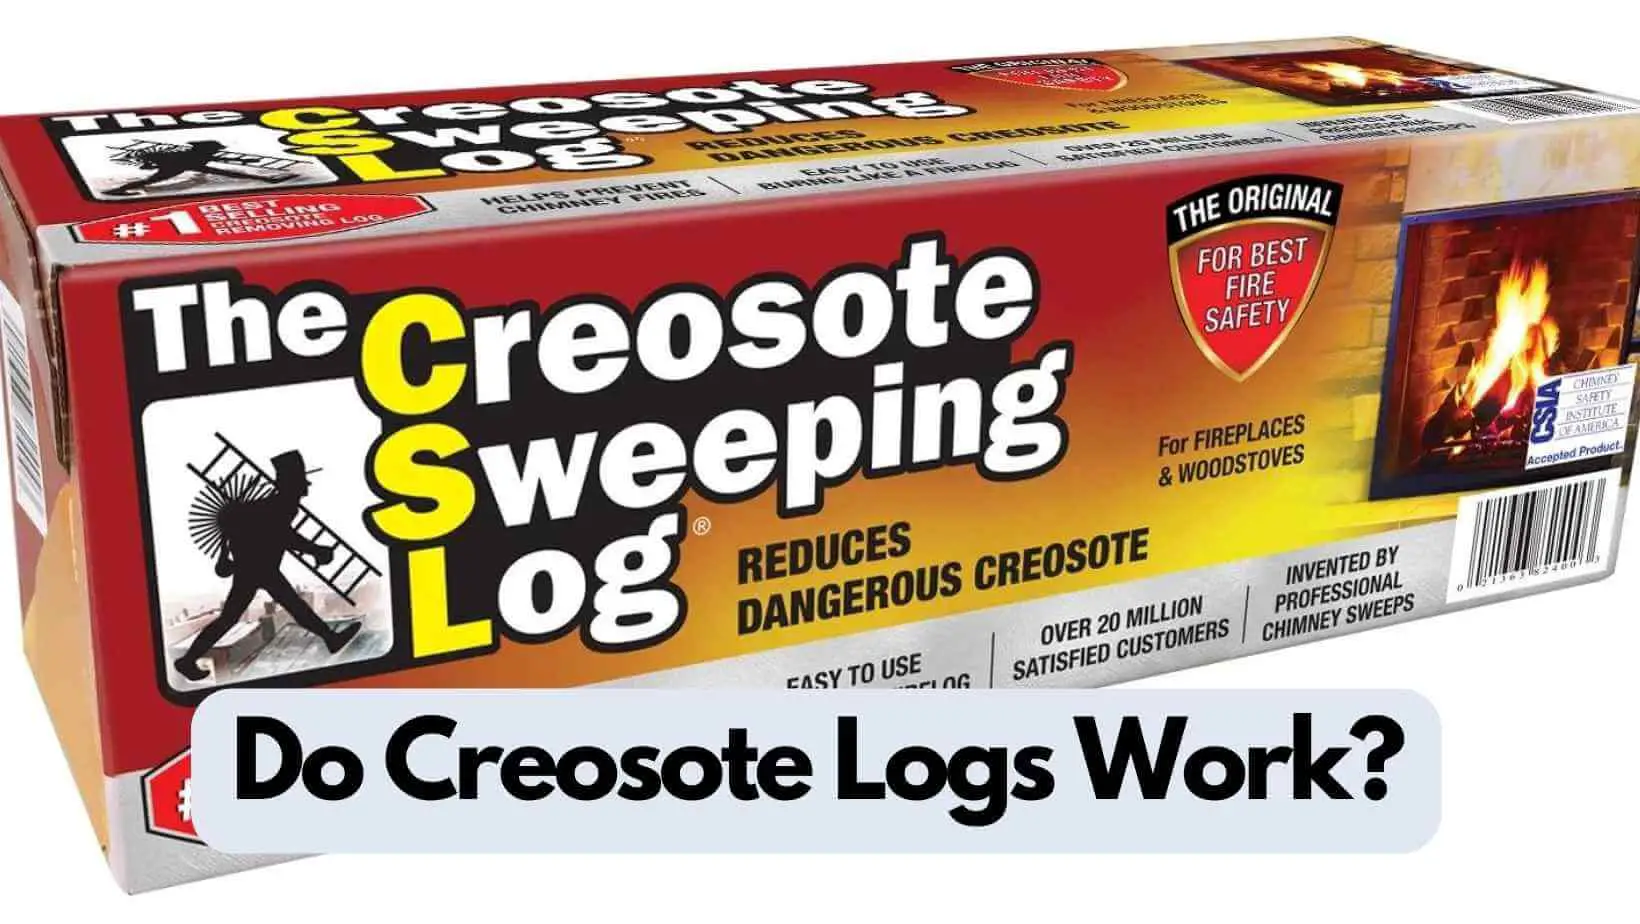 Do Creosote Logs Work